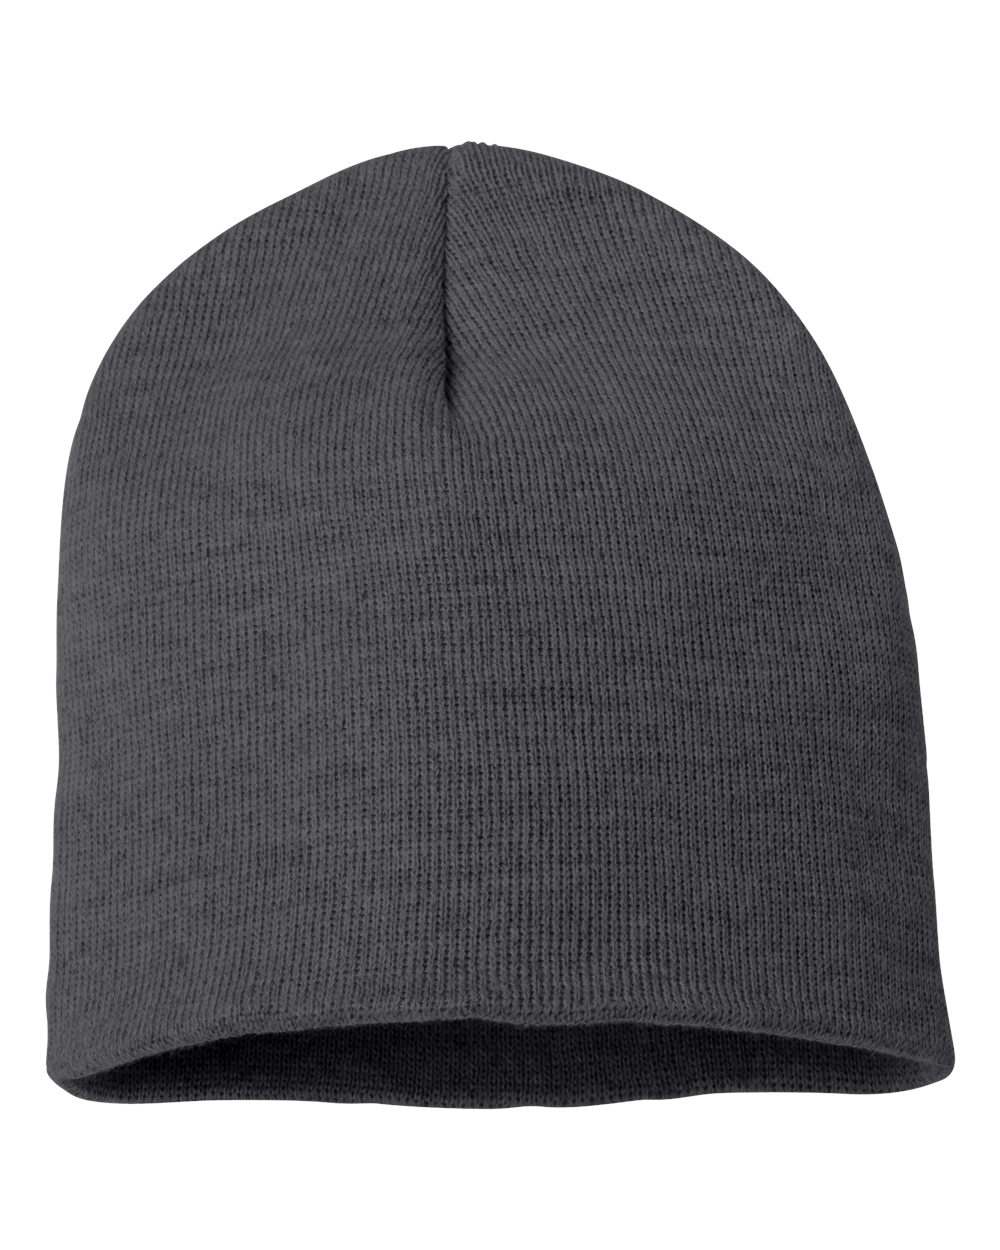 click to view Charcoal/Dark Heather Grey